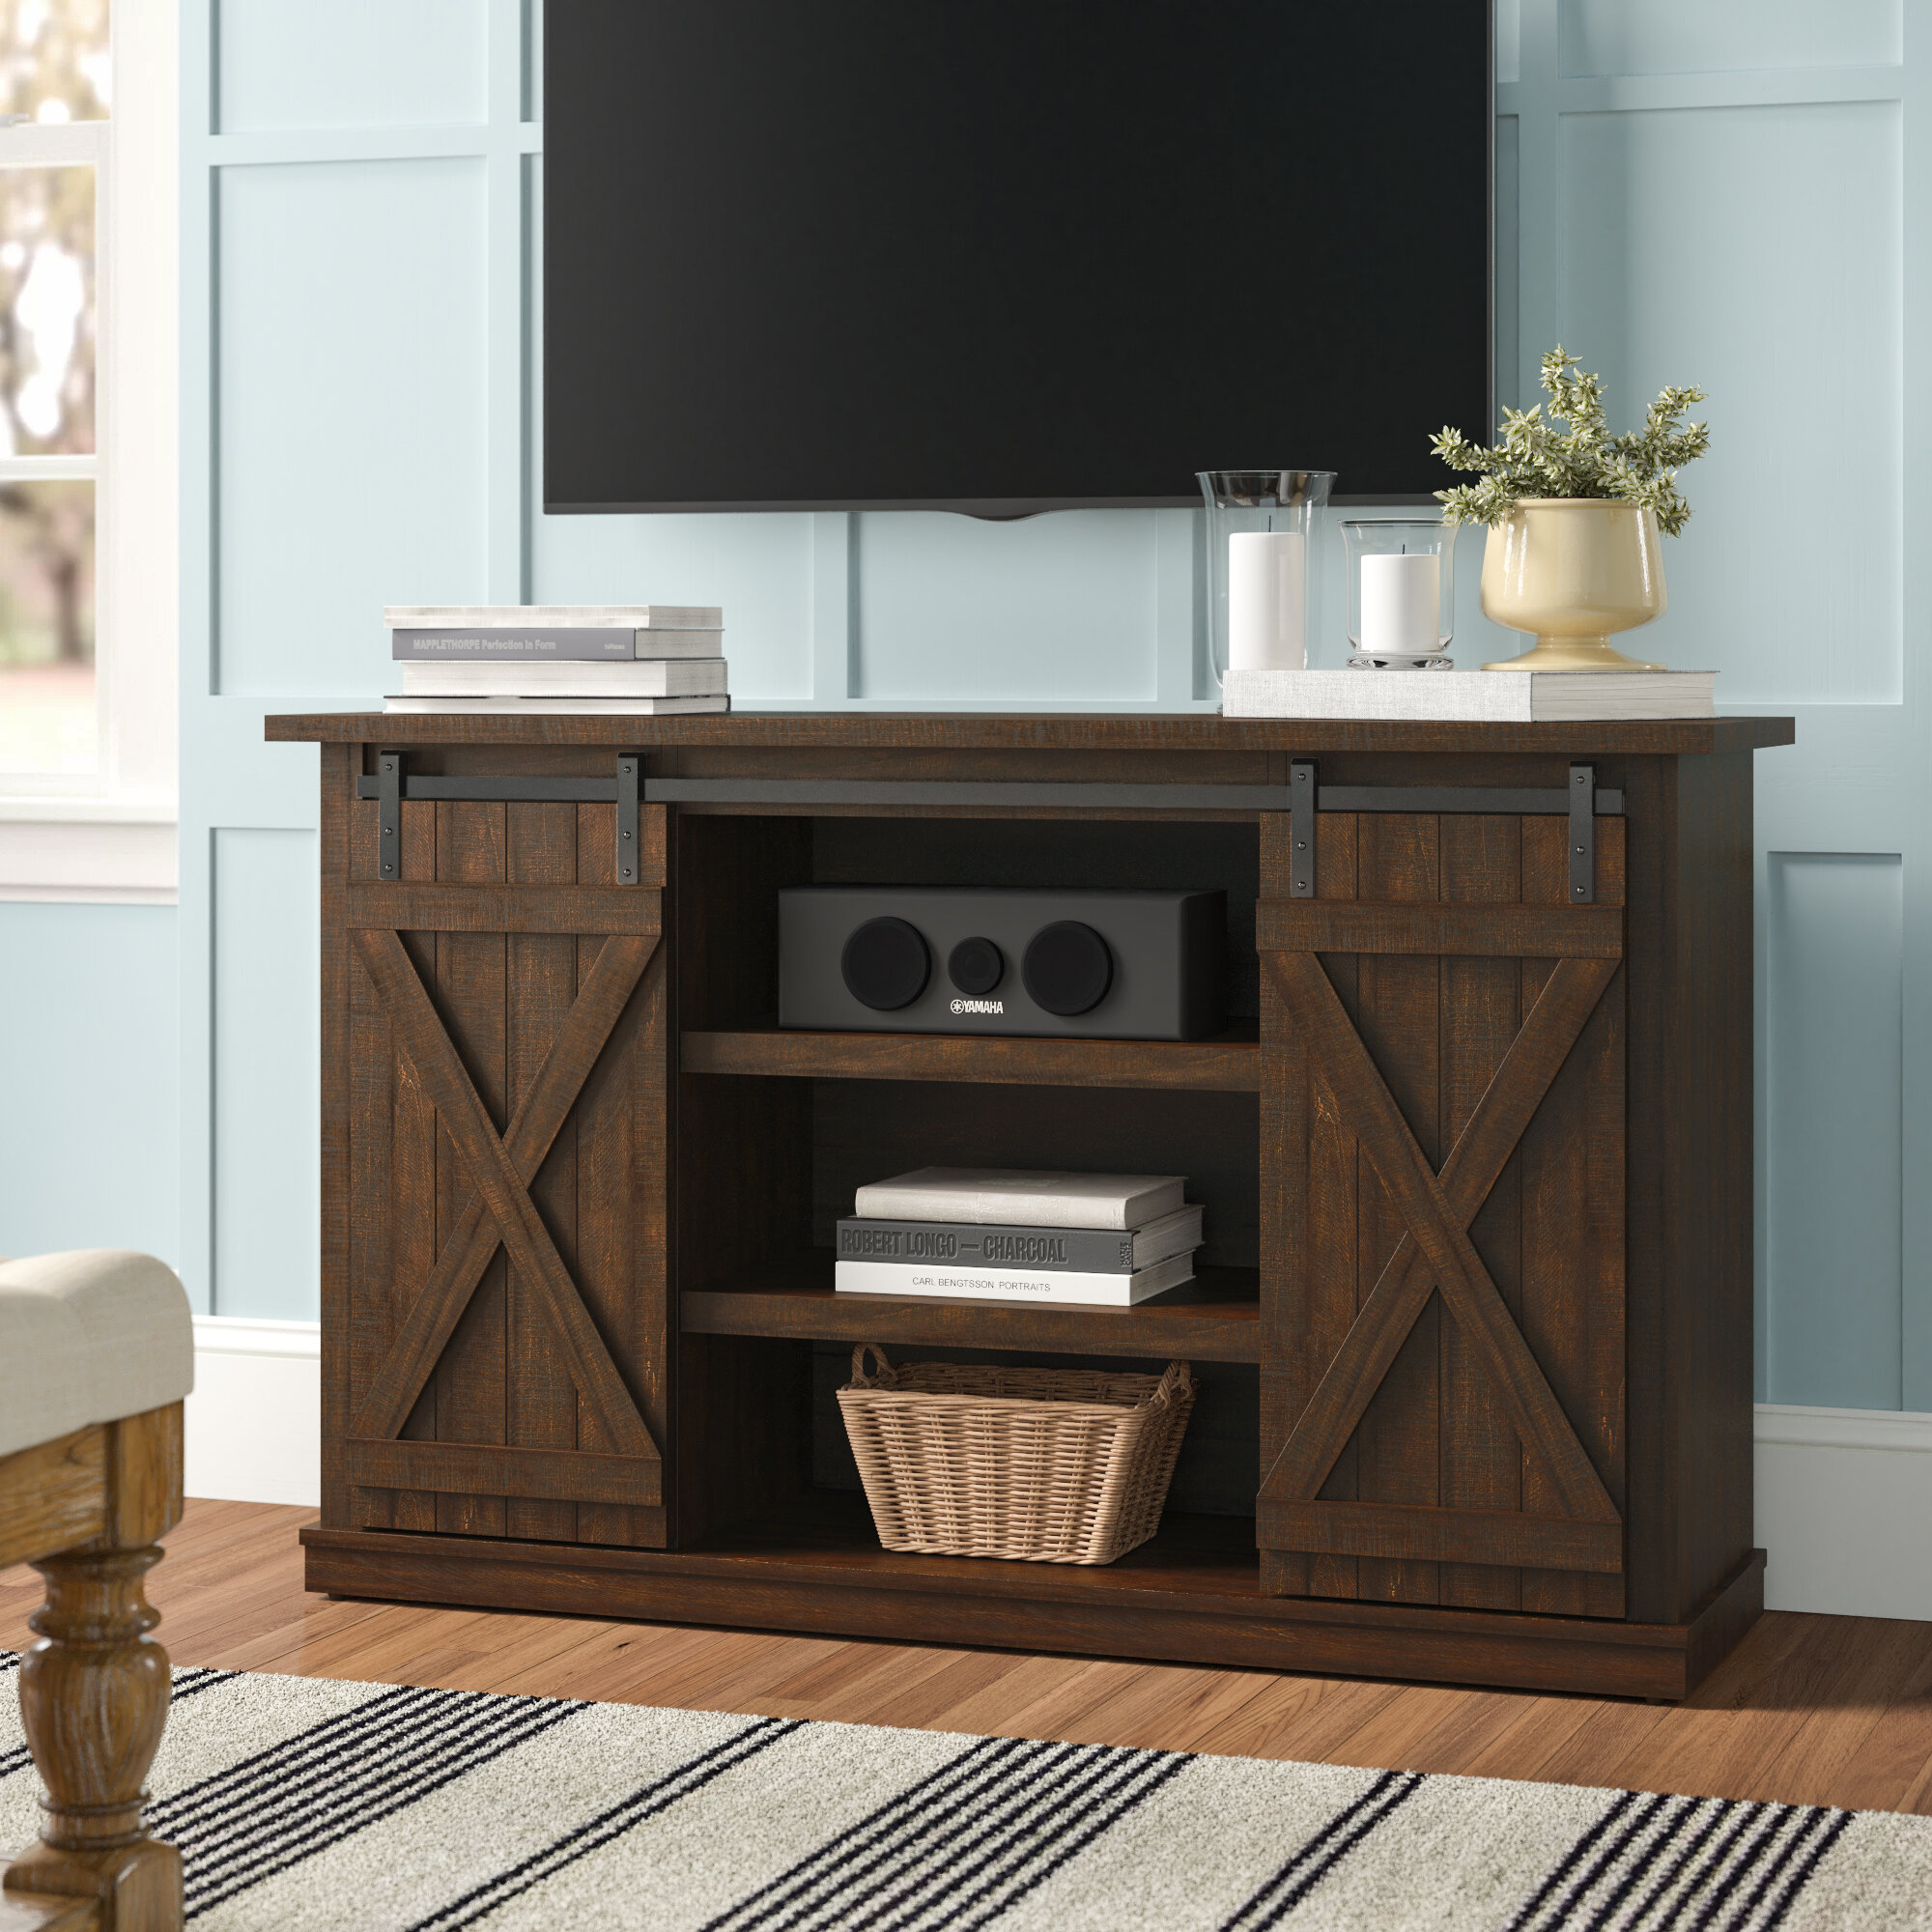 Rustic Farmhouse TV Stand Furniture Up to 60 Inch Entertainment Center Espresso 